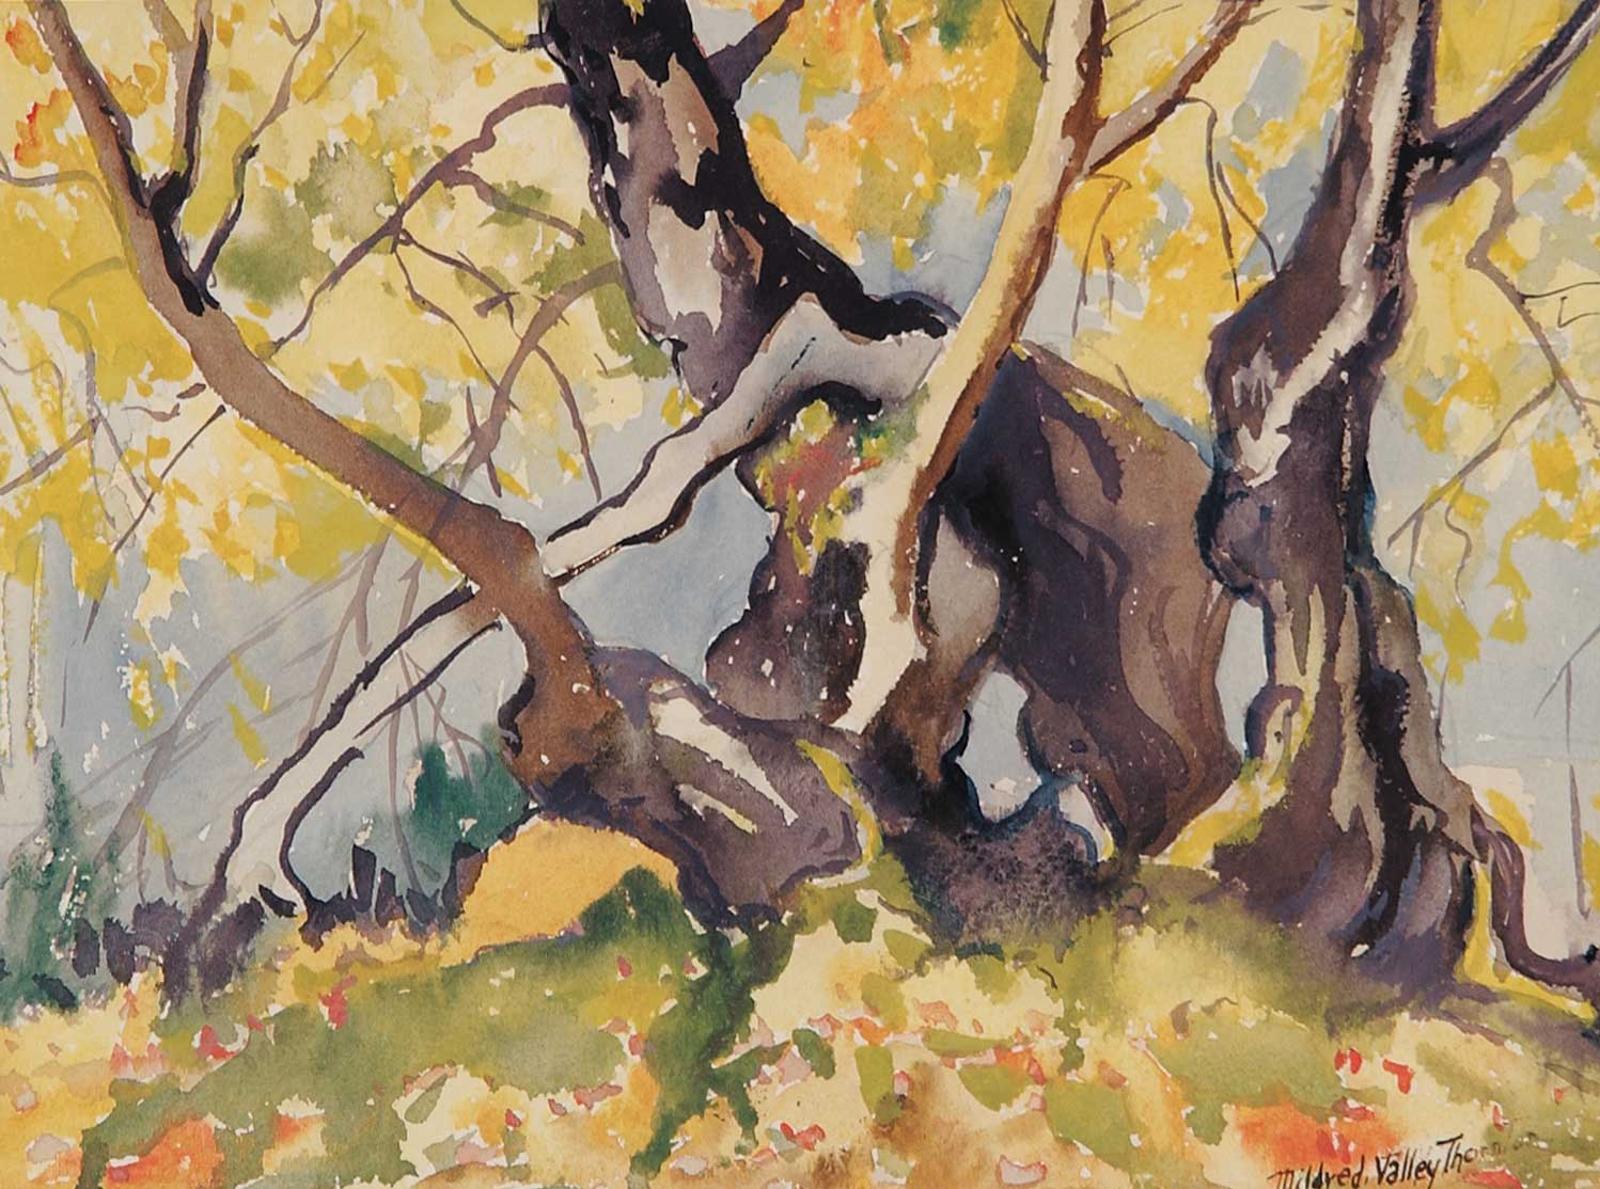 Mildred Valley Thornton (1890-1967) - Untitled - Approaching Fall No. 2